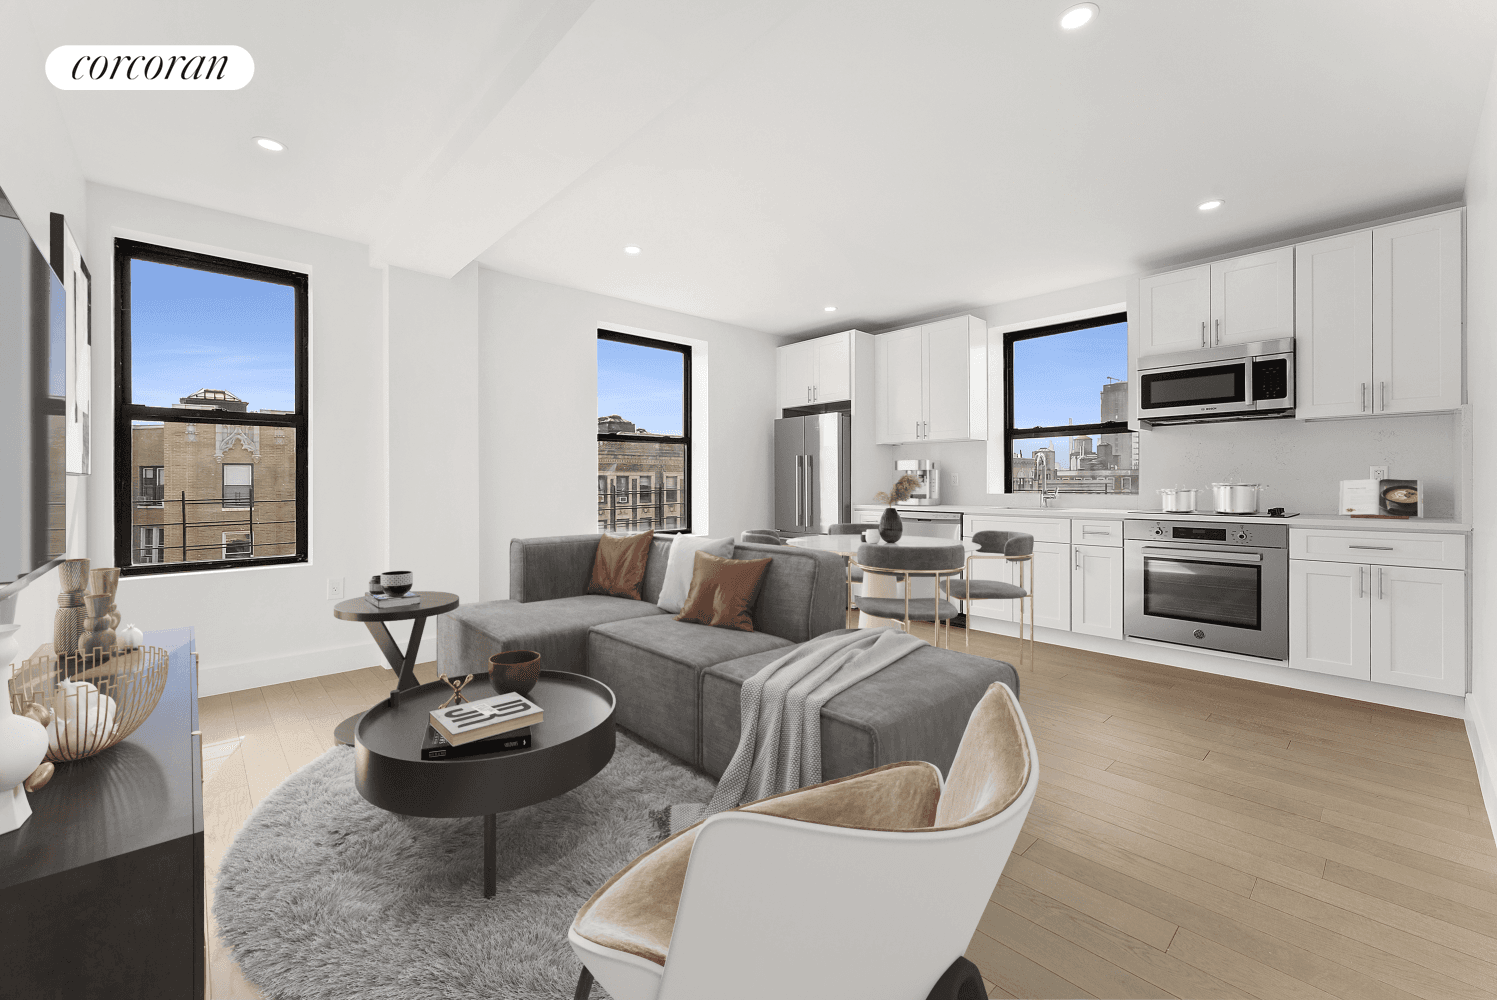 Apartment 1508 This beautifully configured, all new top floor corner residence welcomes you with its beautiful finishes, large windows, great kitchen amp ; bathroom, along with plentiful closet space.